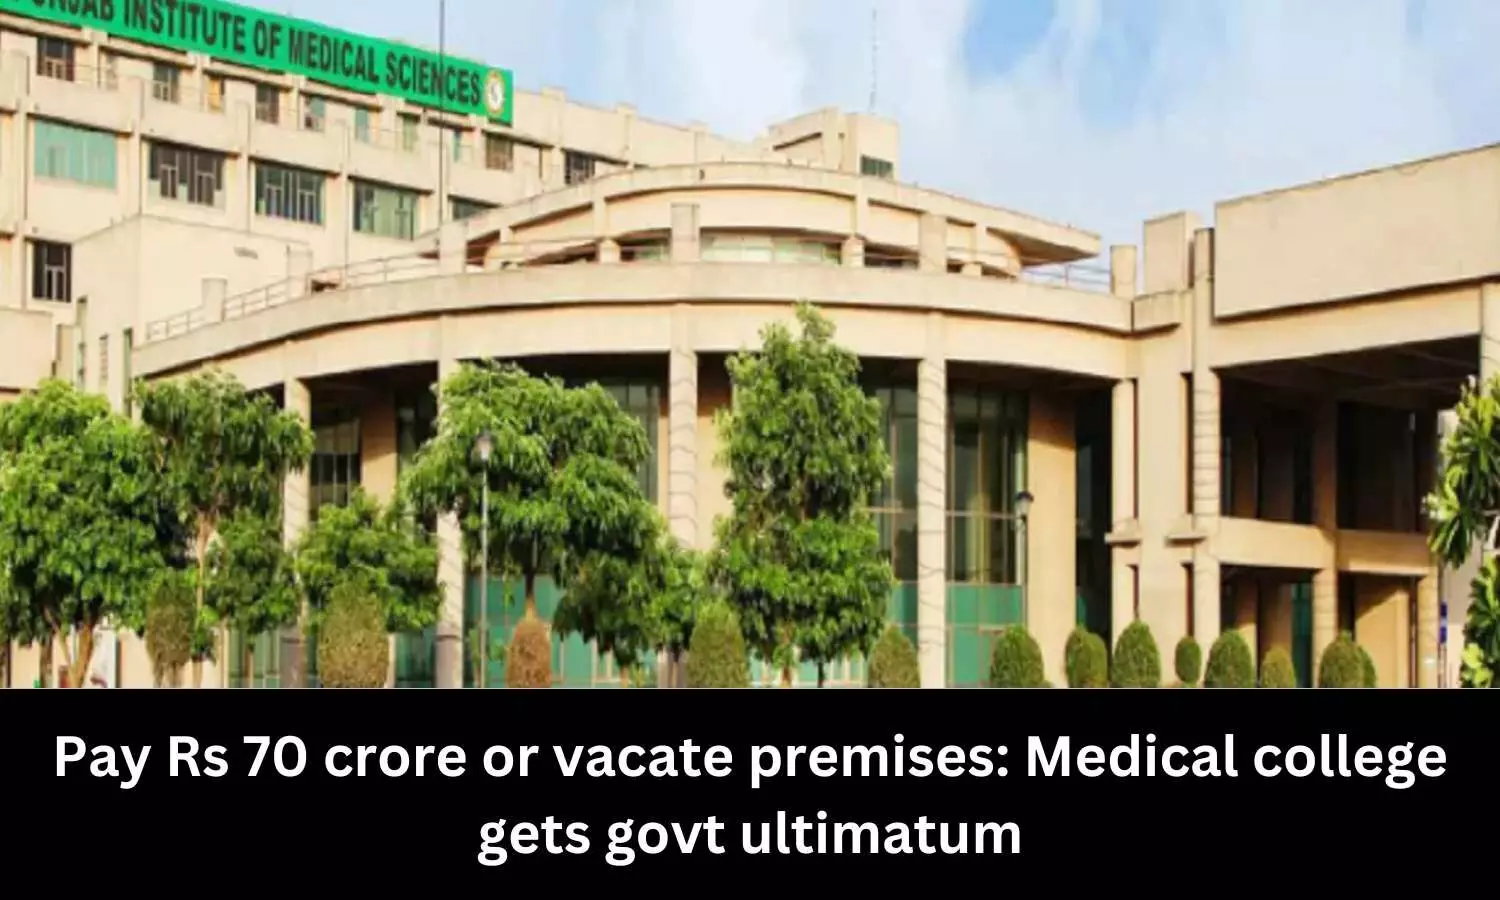 Pay Rs 70 cr or vacate college: Govt to Punjab medical college